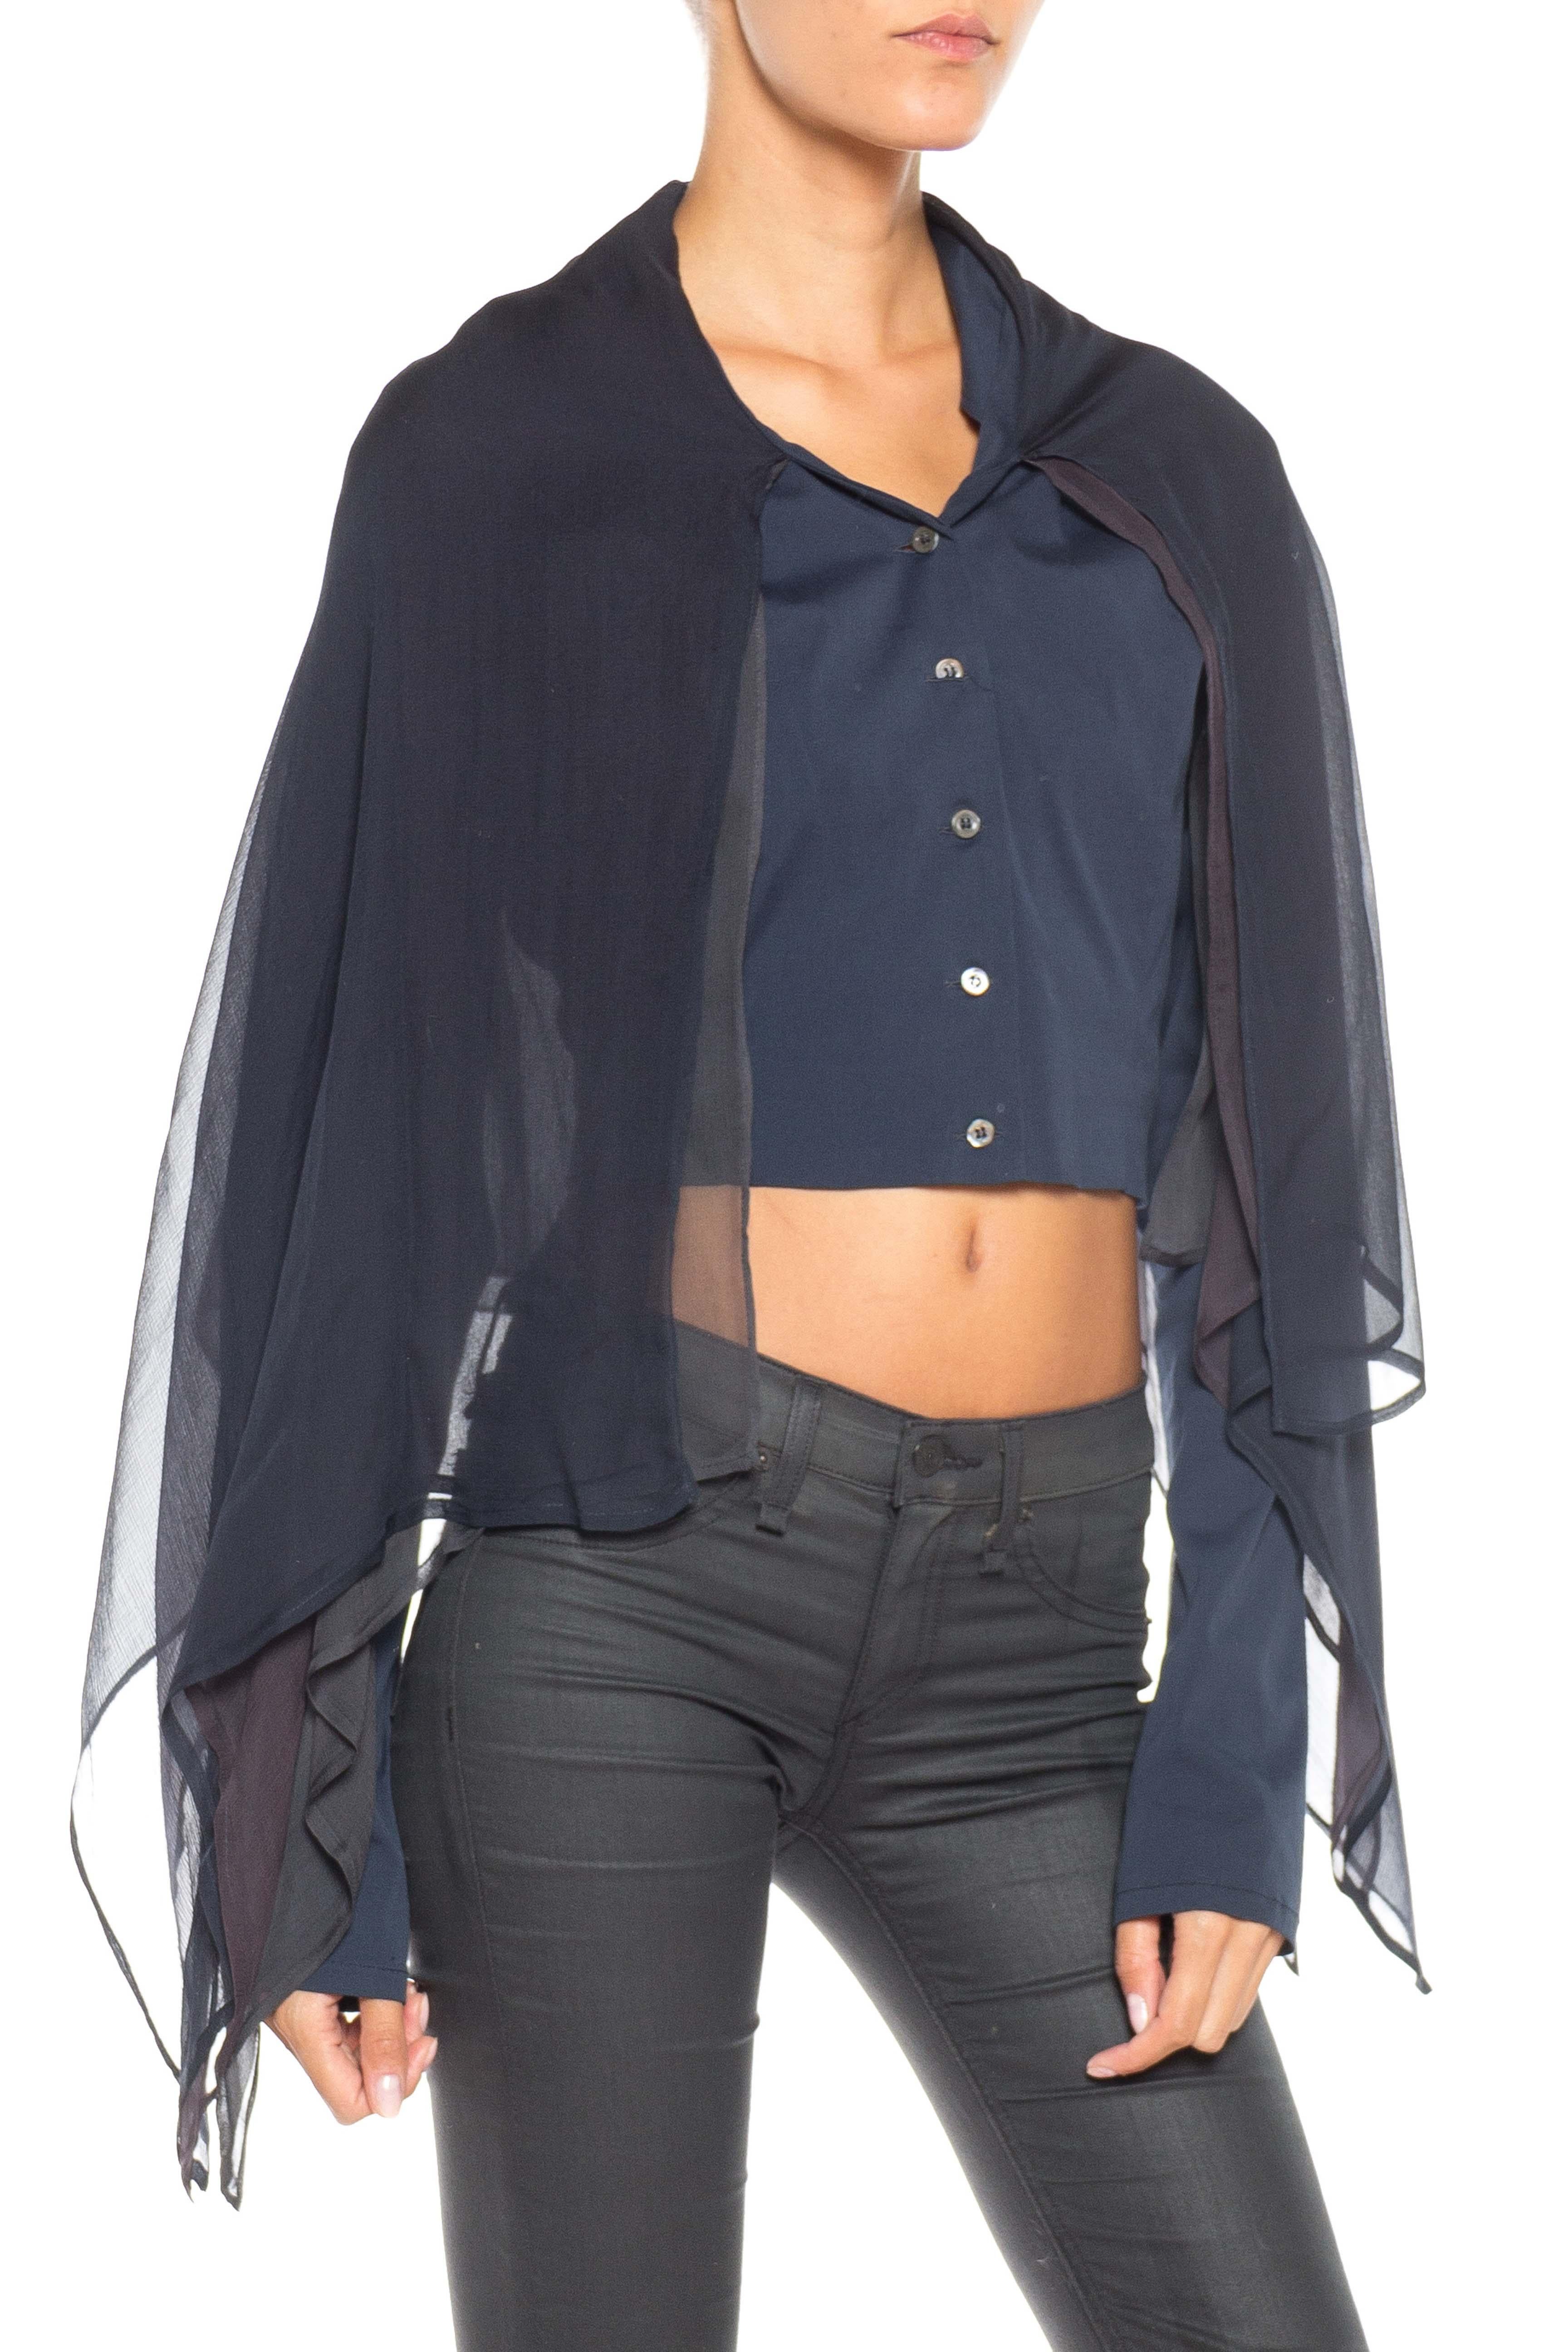 Women's 1990S DOLCE & GABBANA Navy Silk Chiffon Blouse With Sheer Layered Capelet For Sale